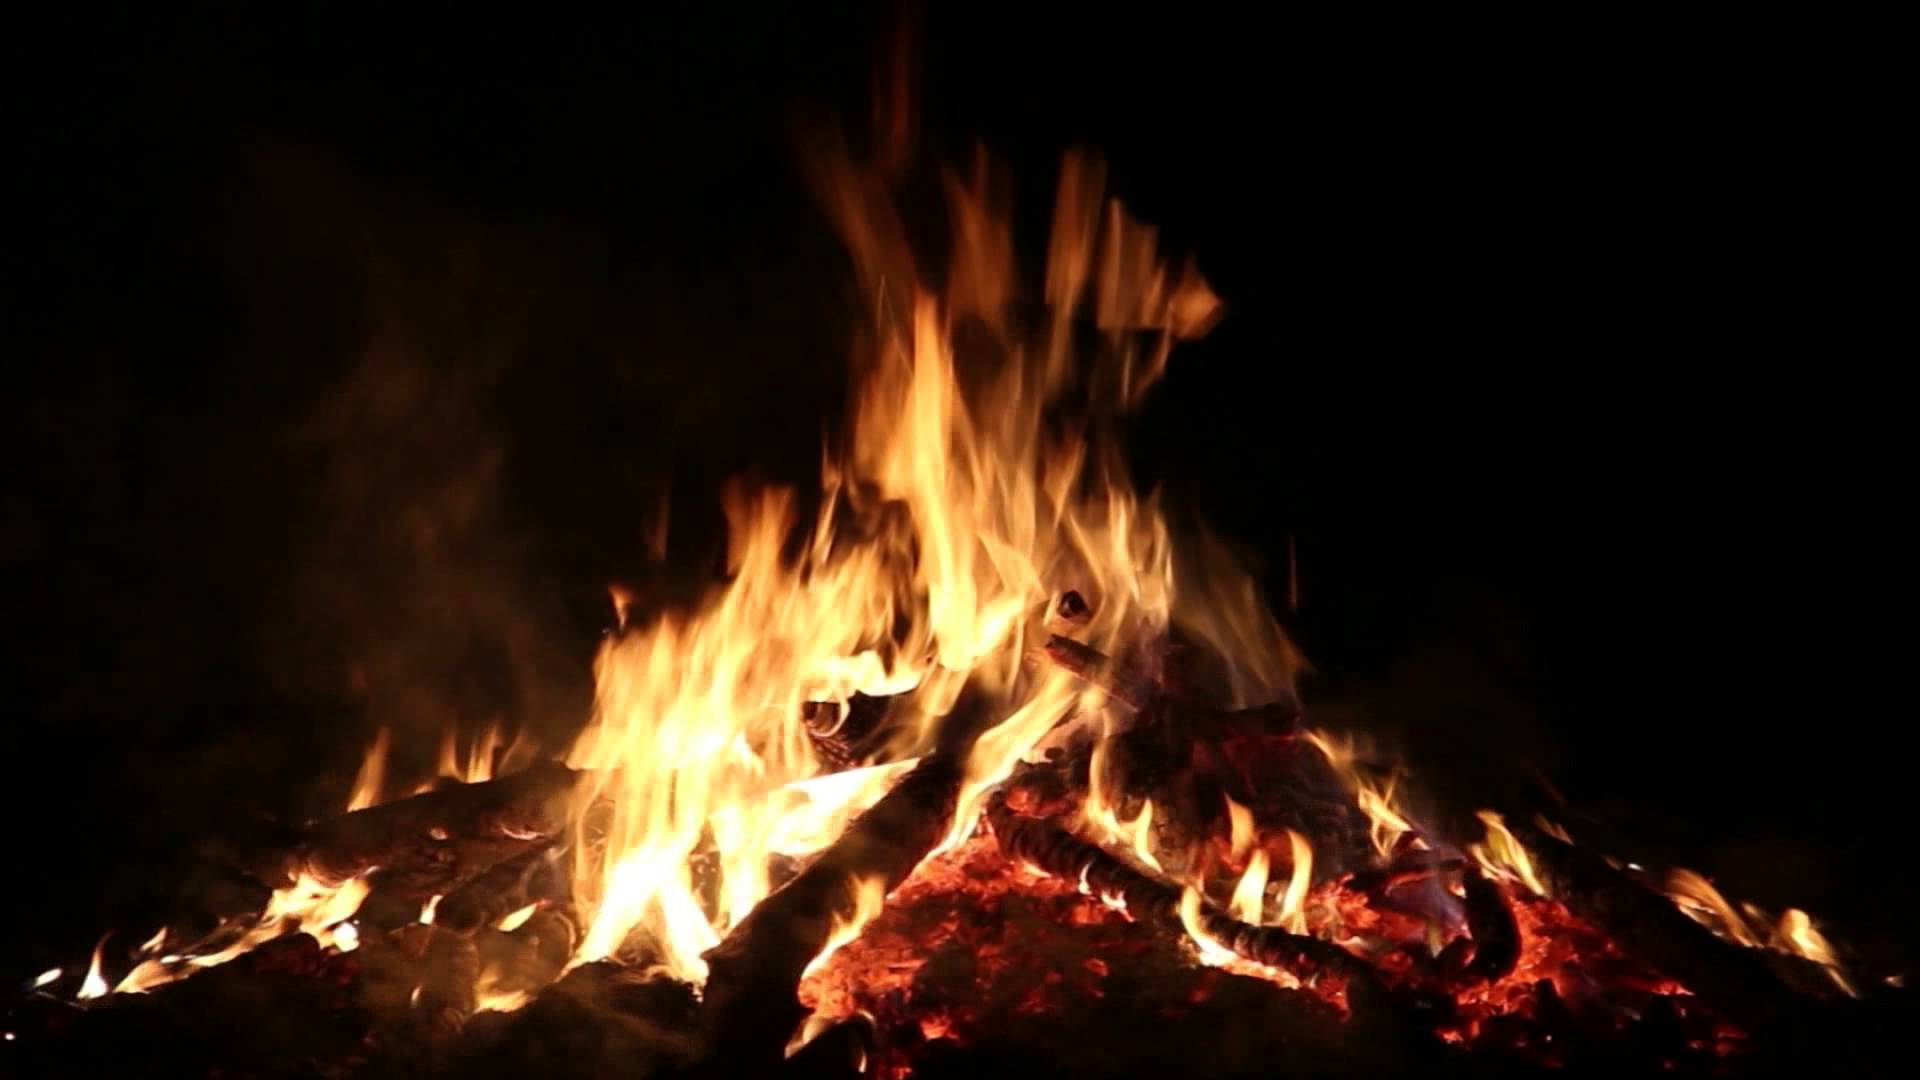 Relaxing Campfire with Crackling Fire Sounds (Full HD) - YouTube